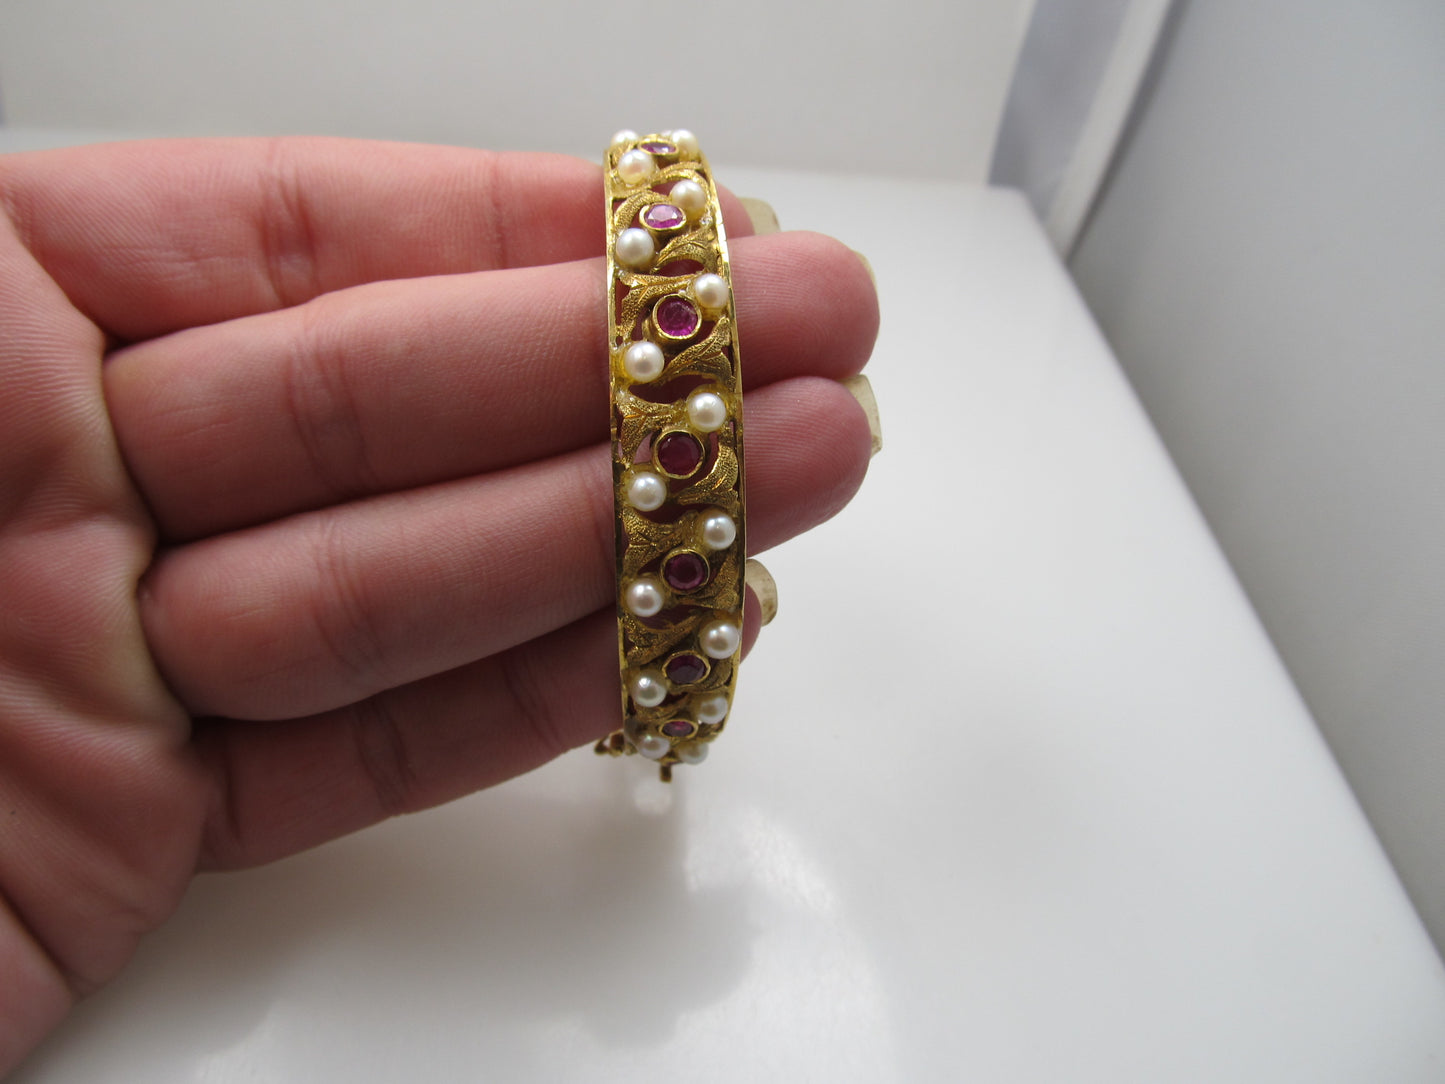 Vintage 18k yellow gold bangle bracelet with ruby and pearl